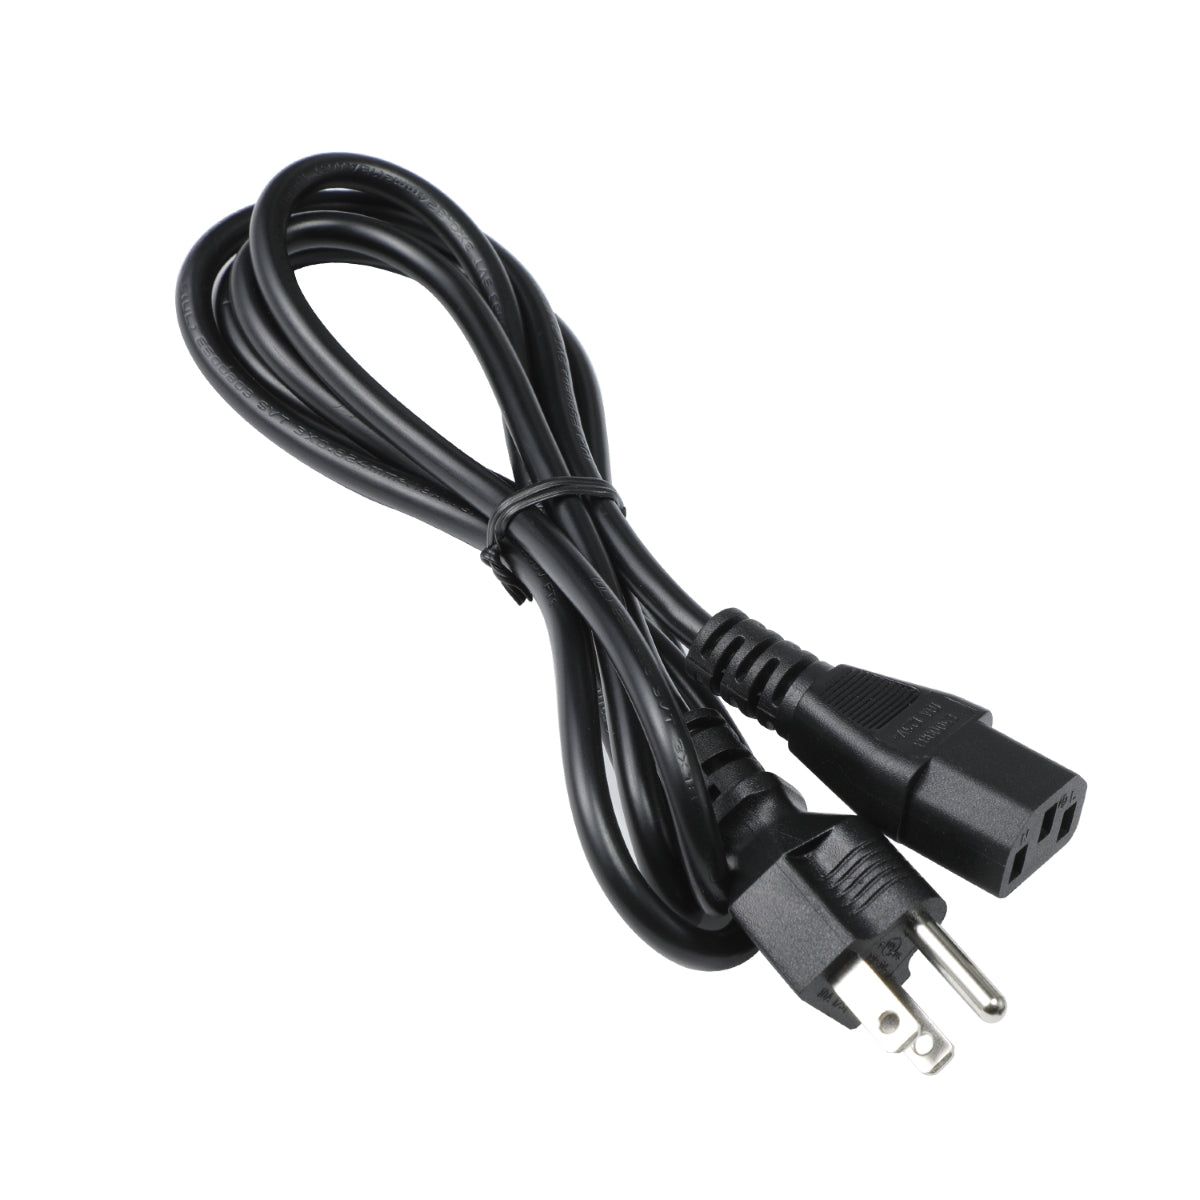 Power Cord for Dell U2515H Monitor